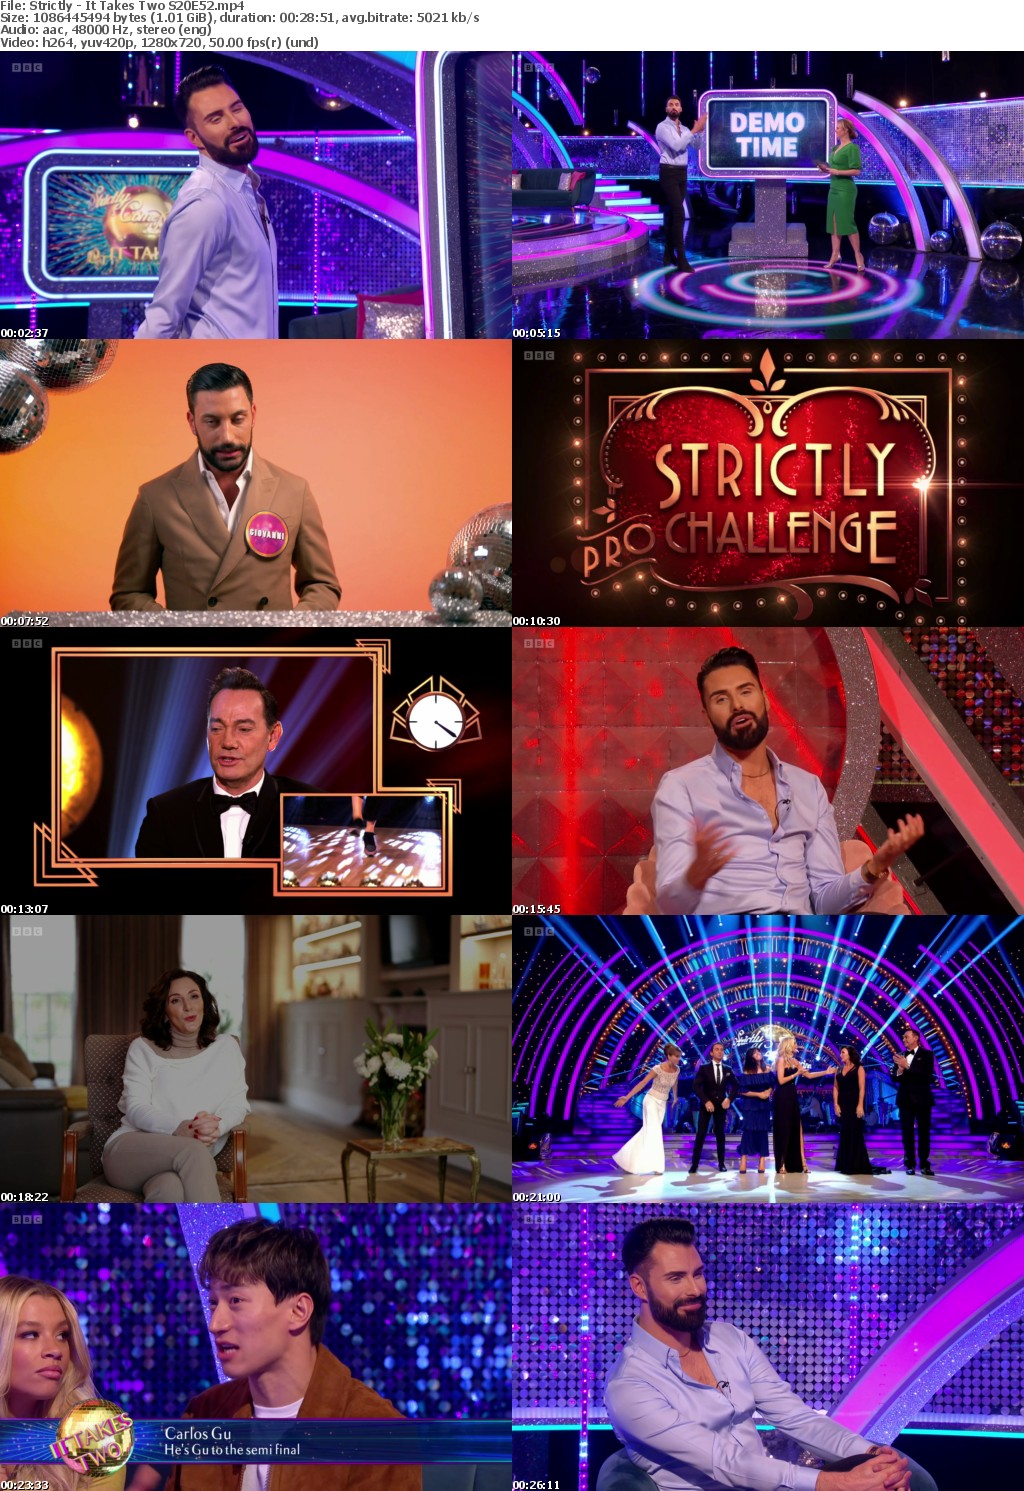 Strictly - It Takes Two S20E51 (1280x720p HD, 50fps, soft Eng subs)